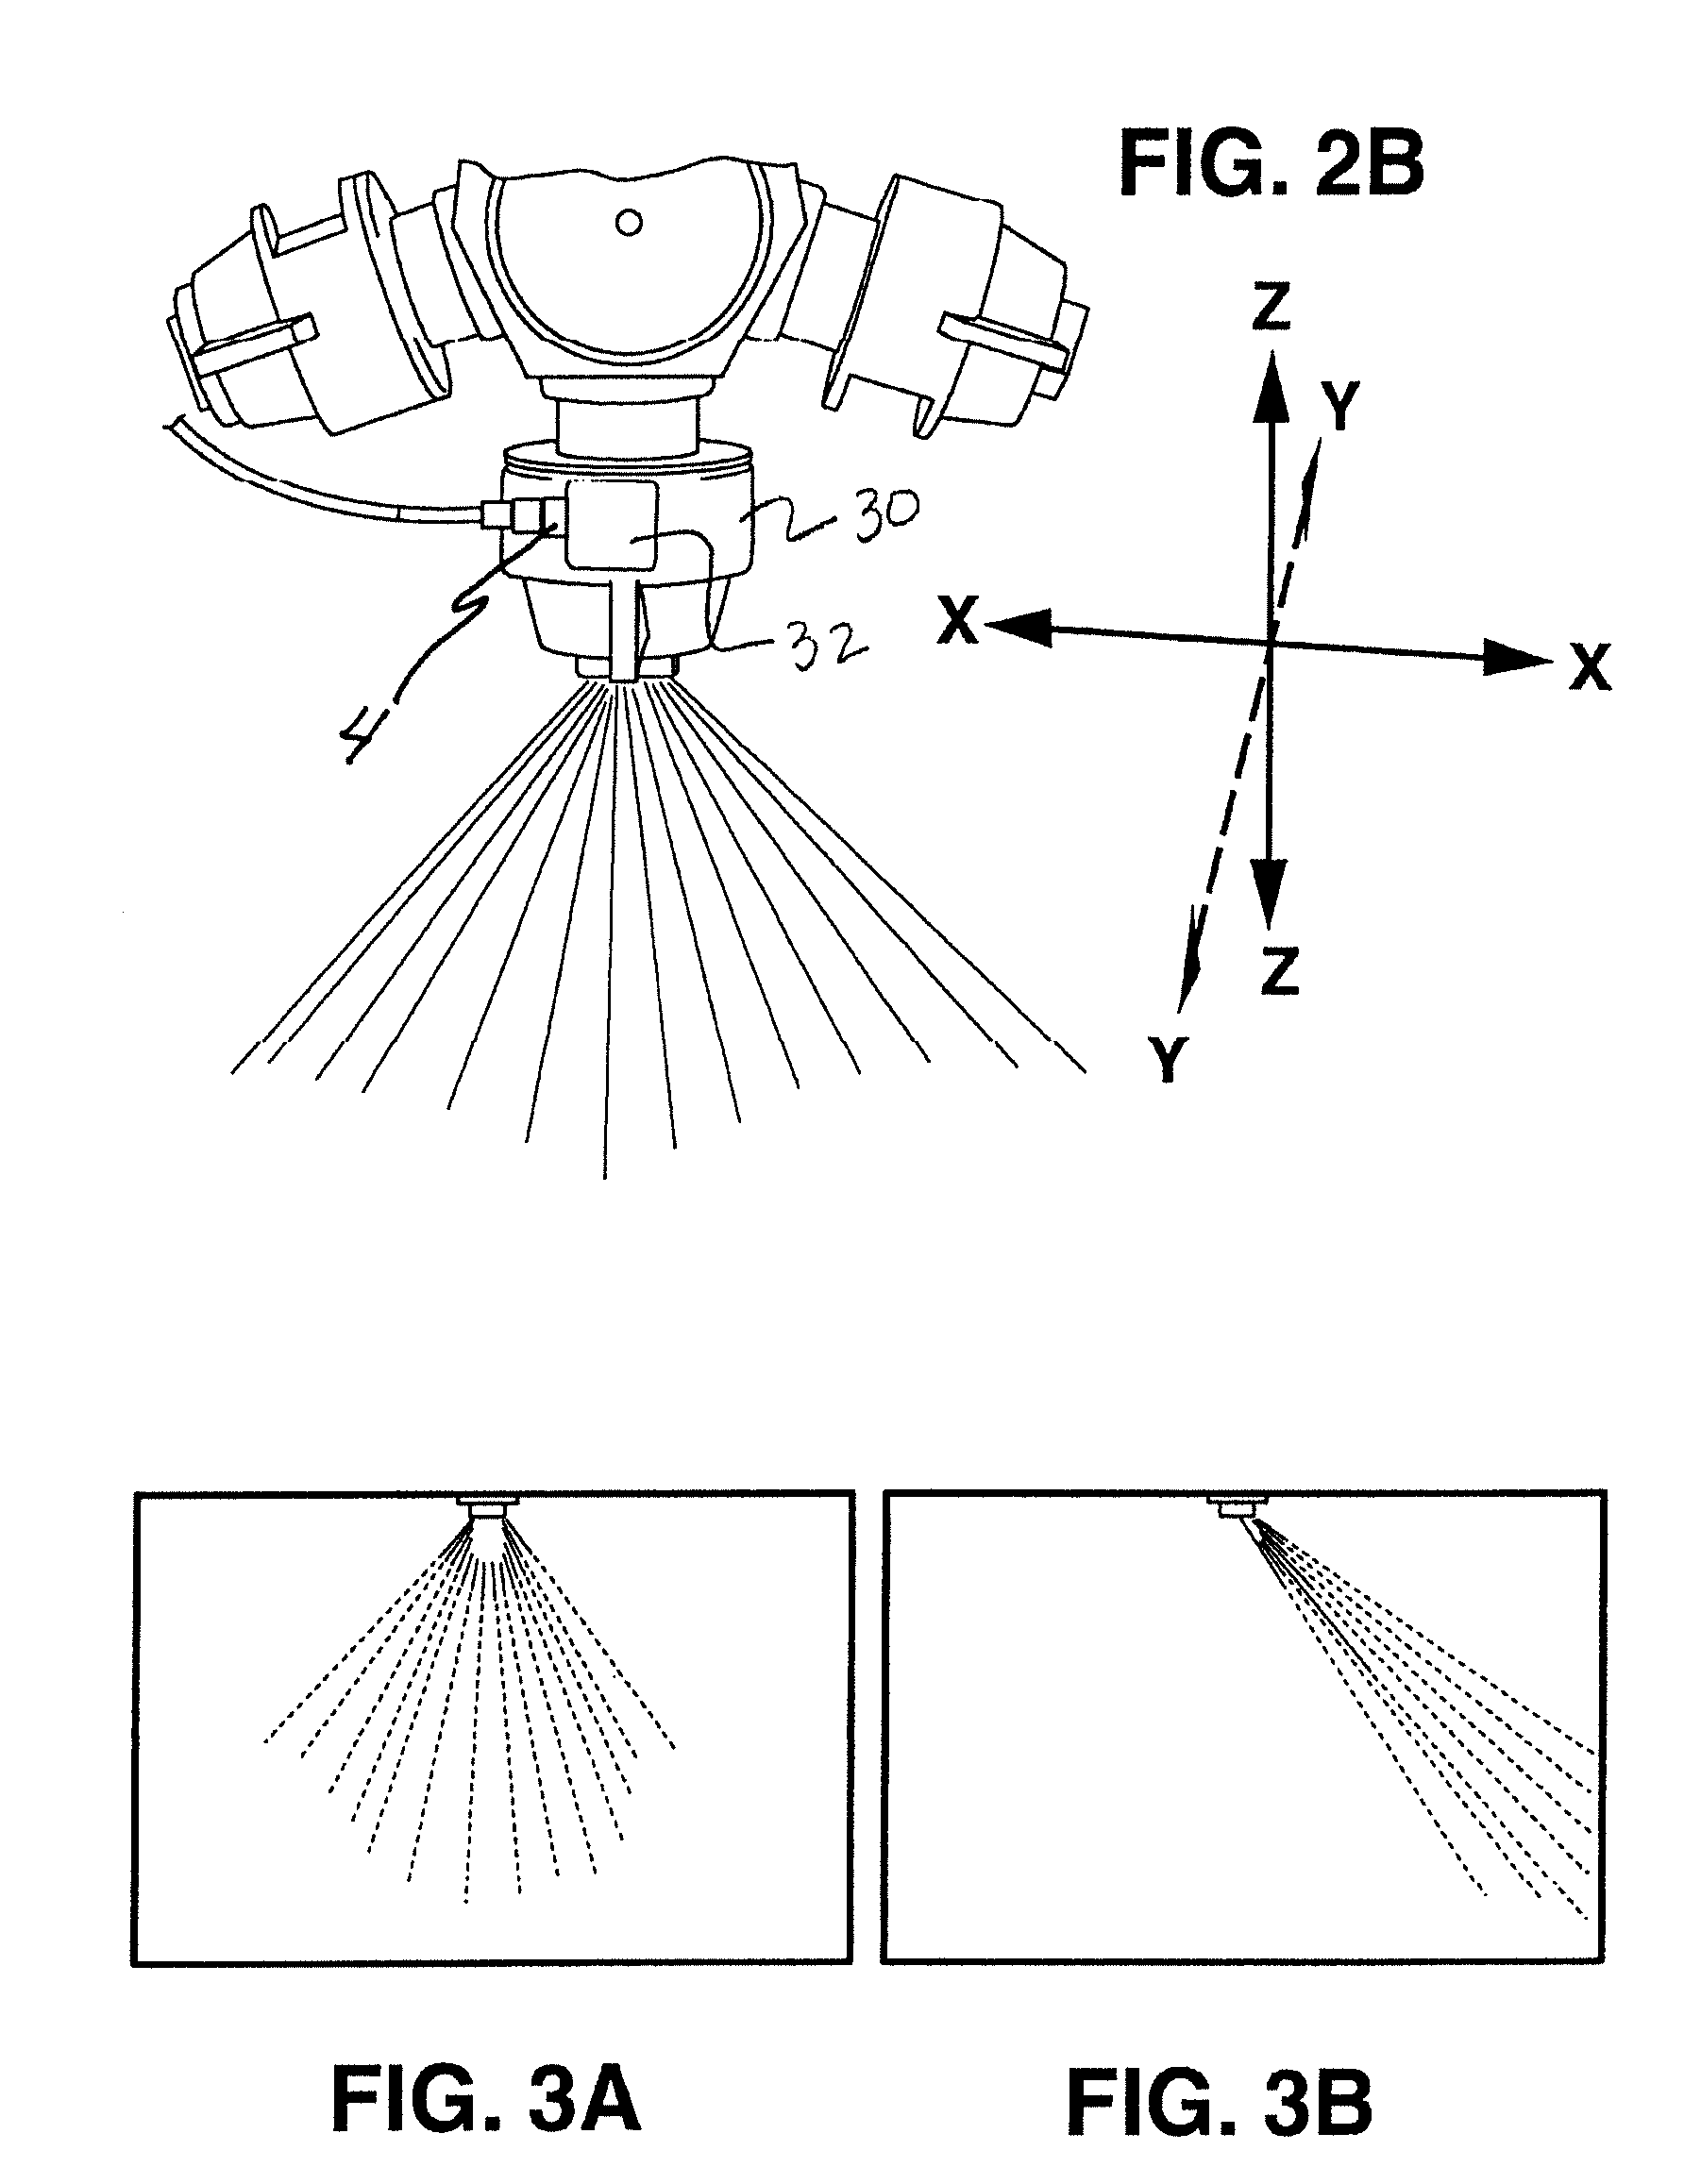 Flow control and operation monitoring system for individual spray nozzles